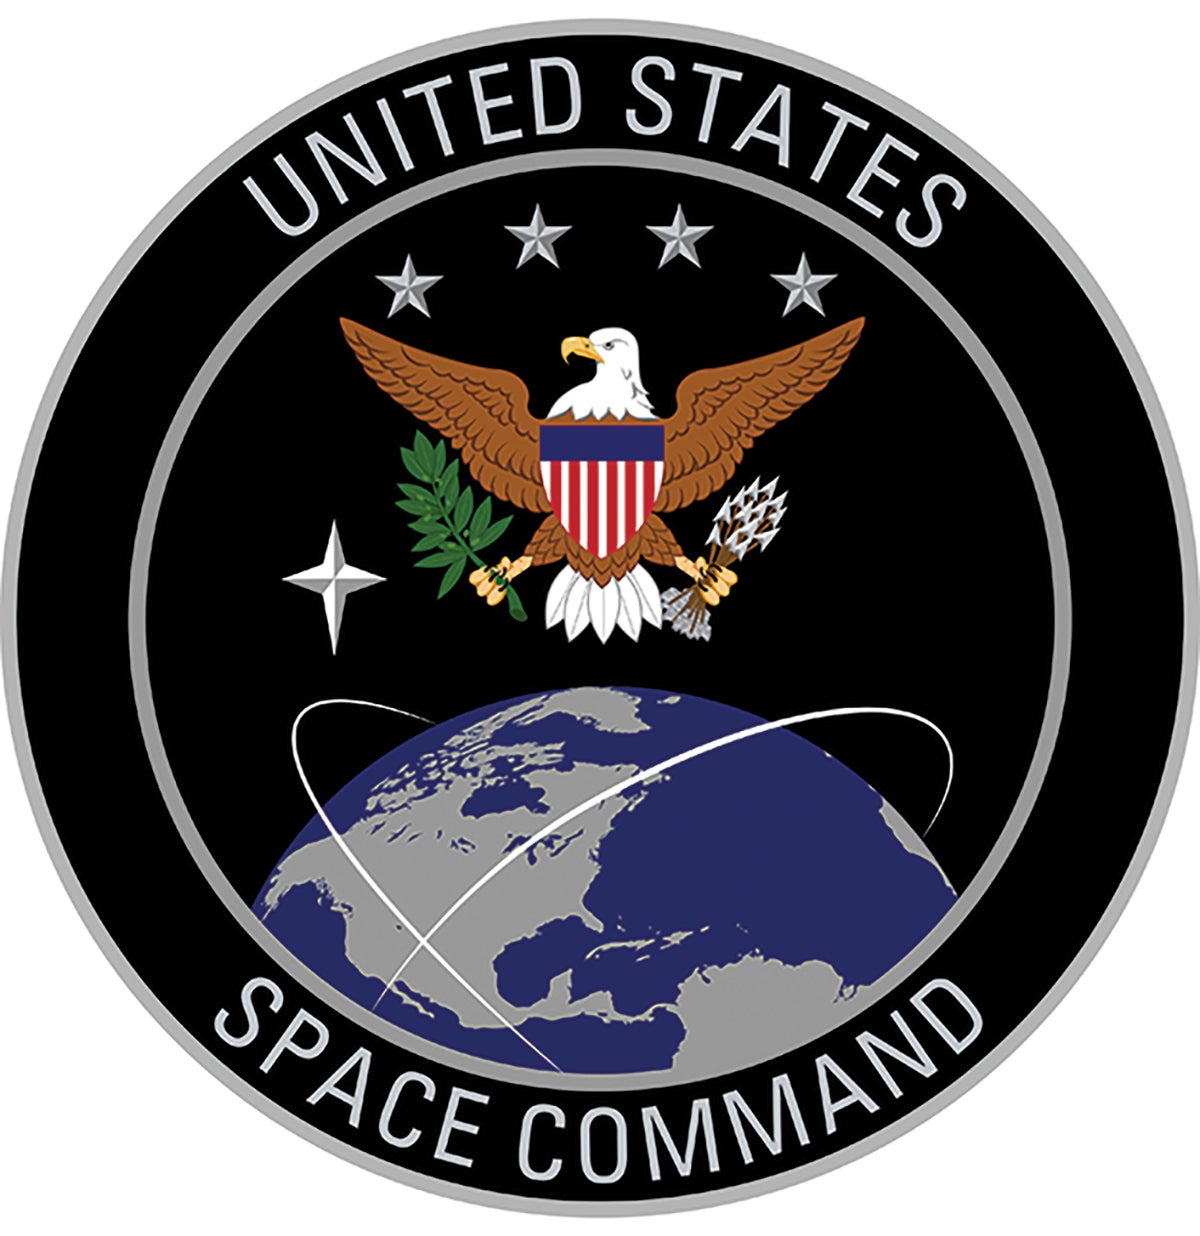 The emblem of the U.S. Space Command. (Credit: DoD)